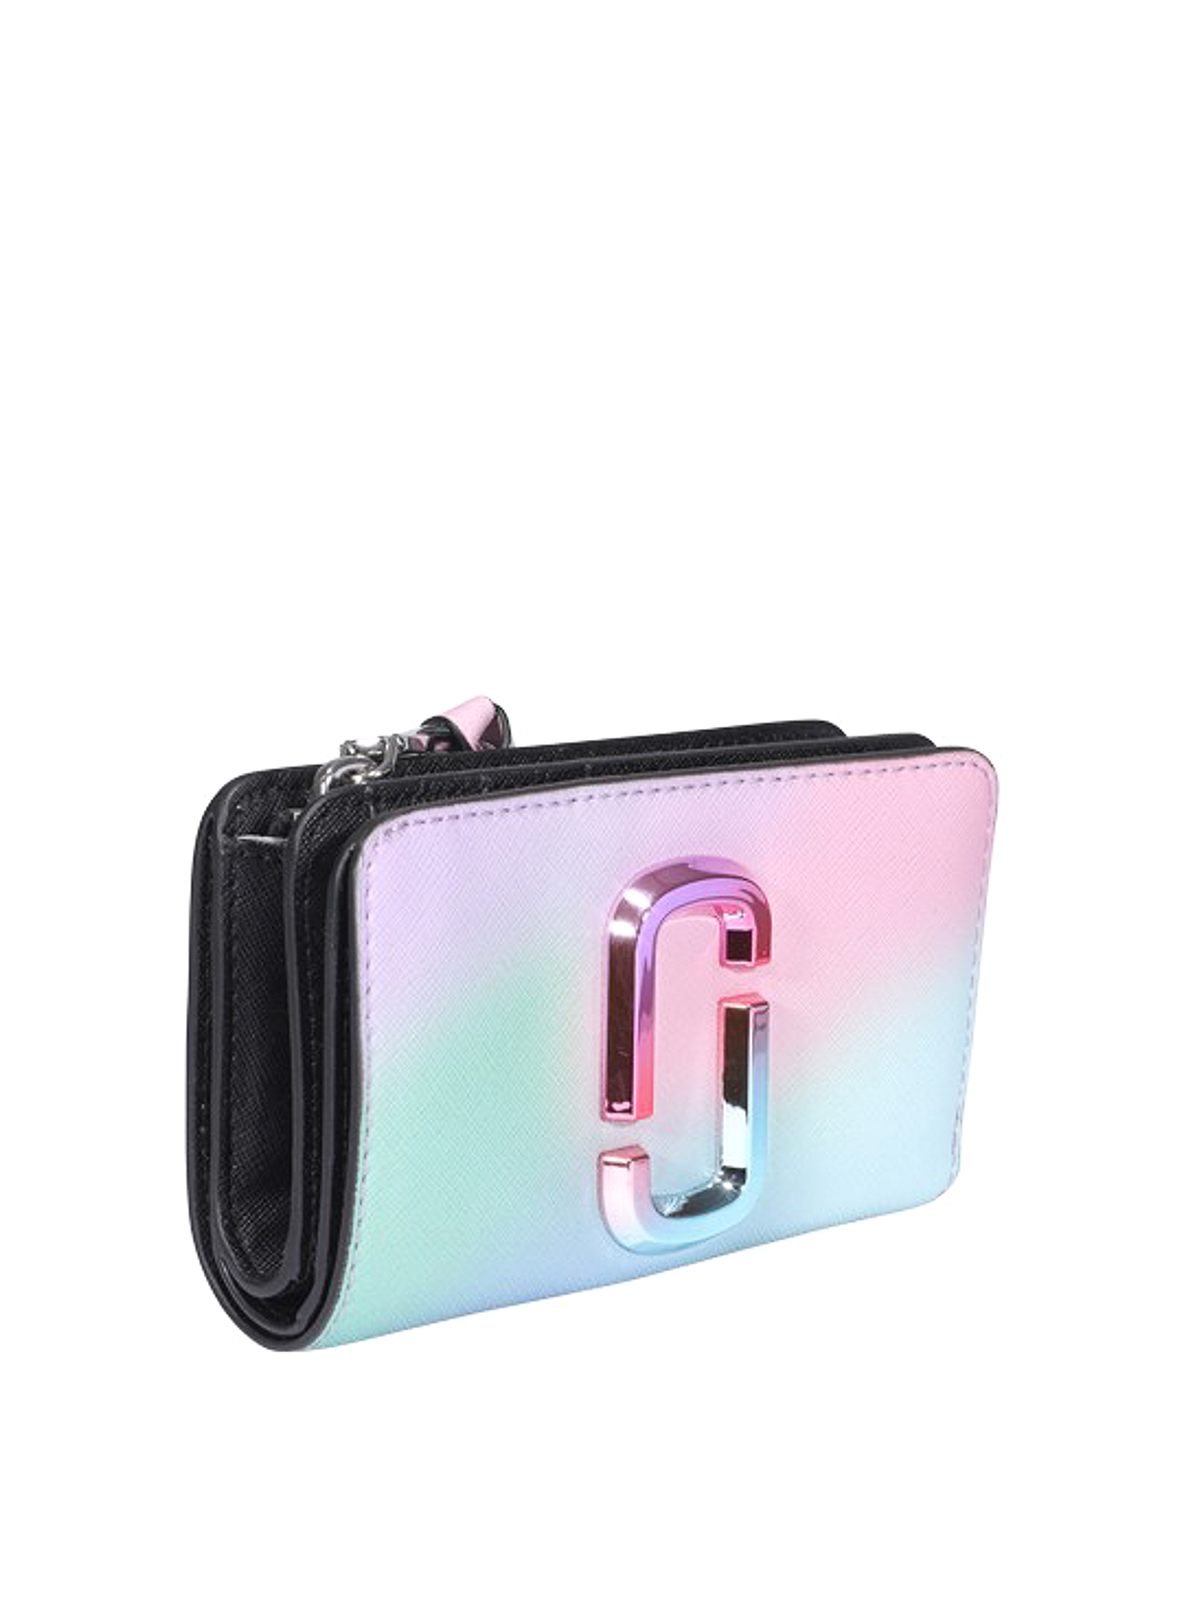 Marc Jacobs The Snapshot Airbrush